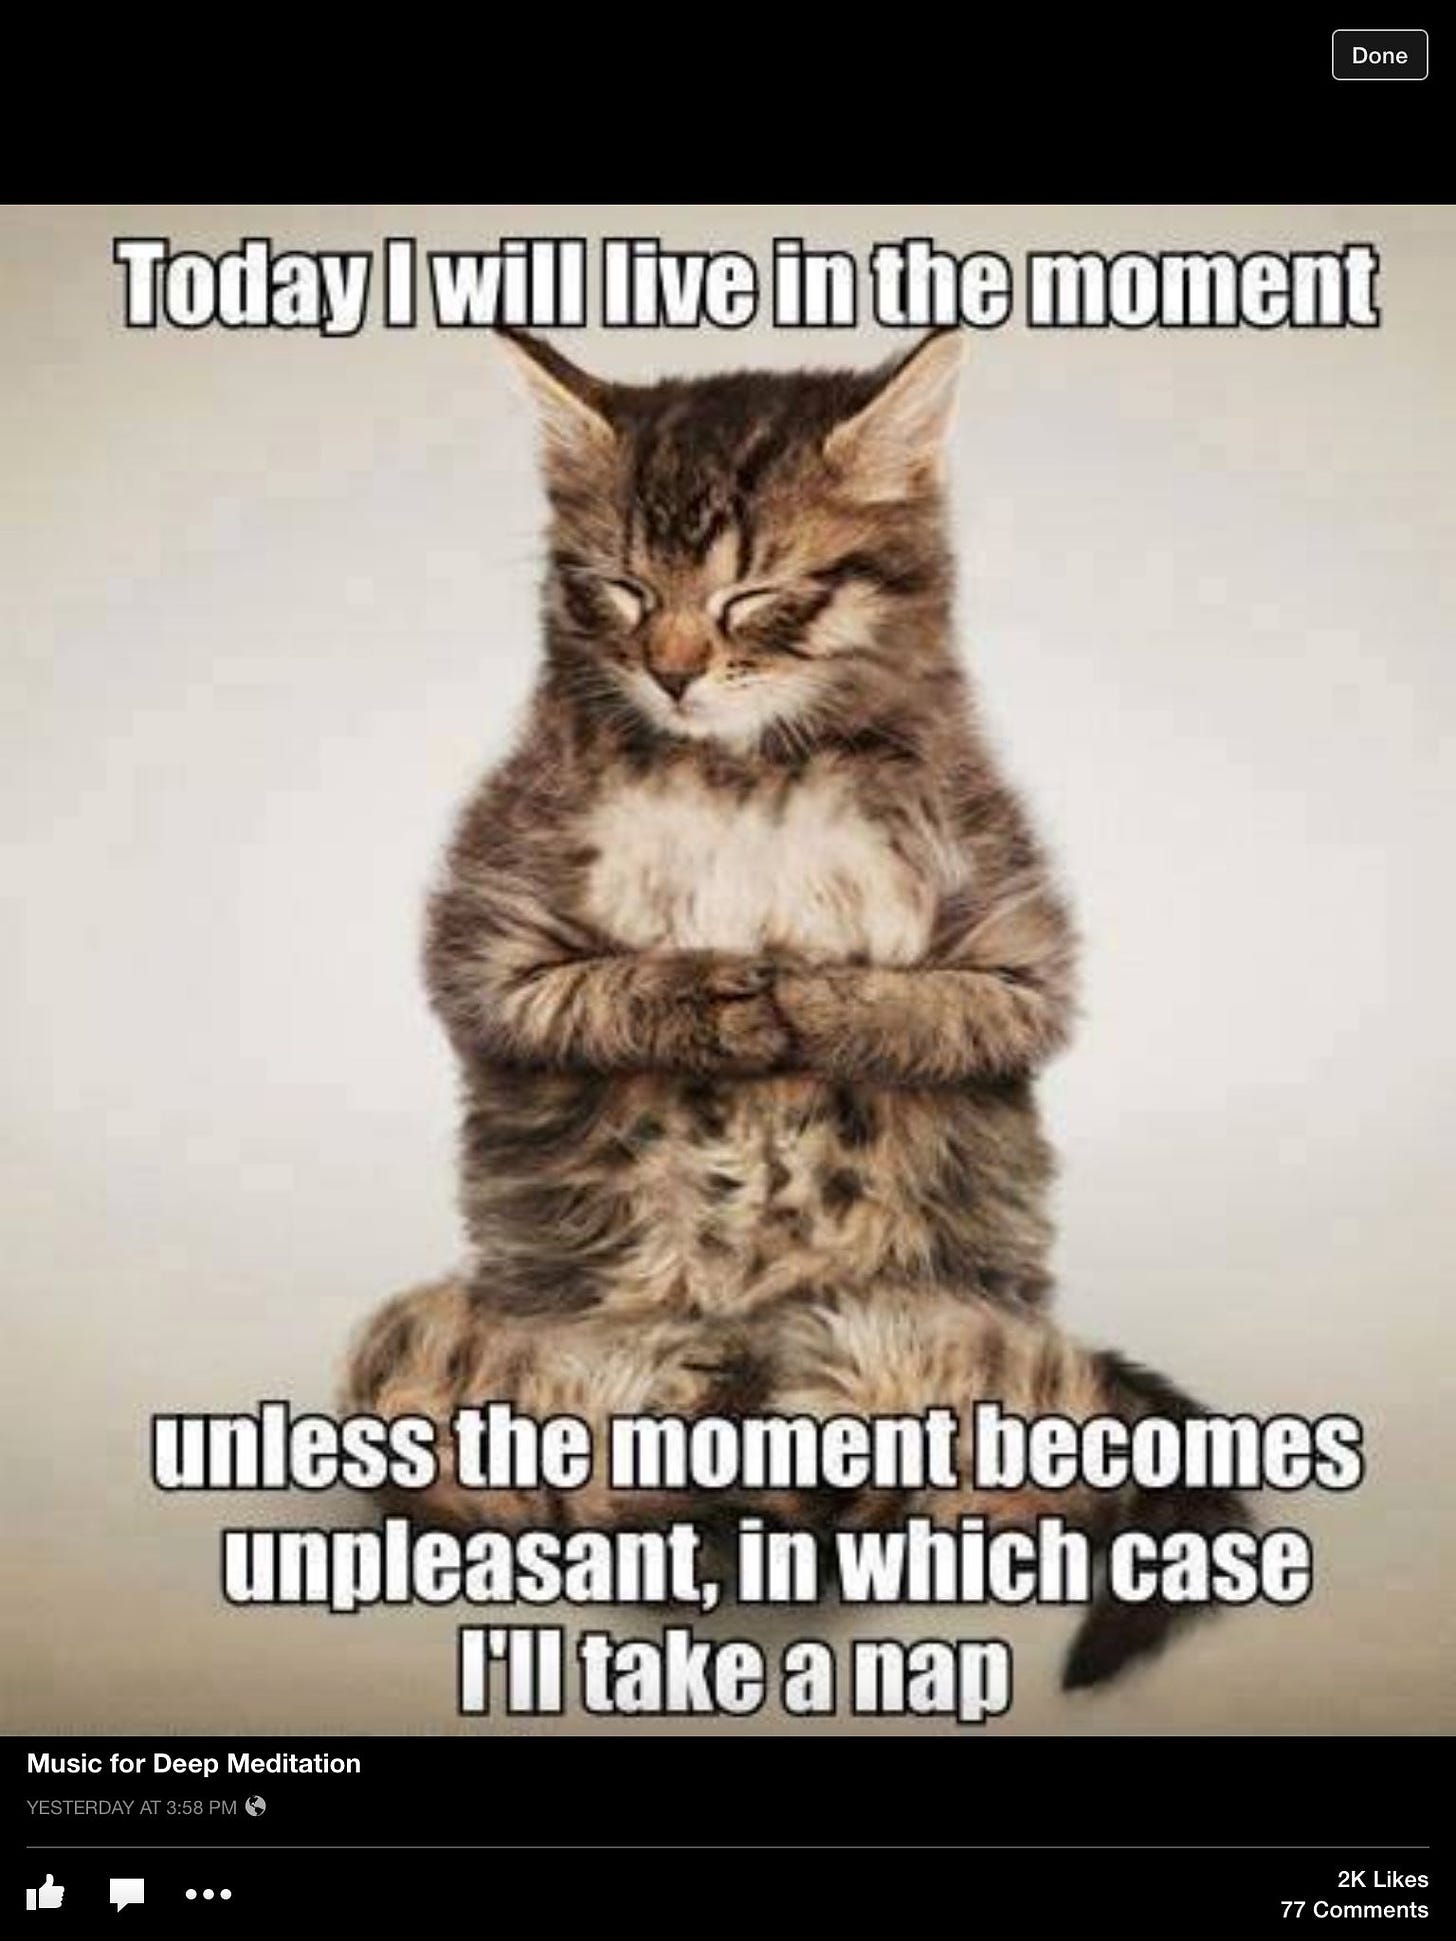 Good Advice Kitty! | Cat quotes funny, Funny animal memes